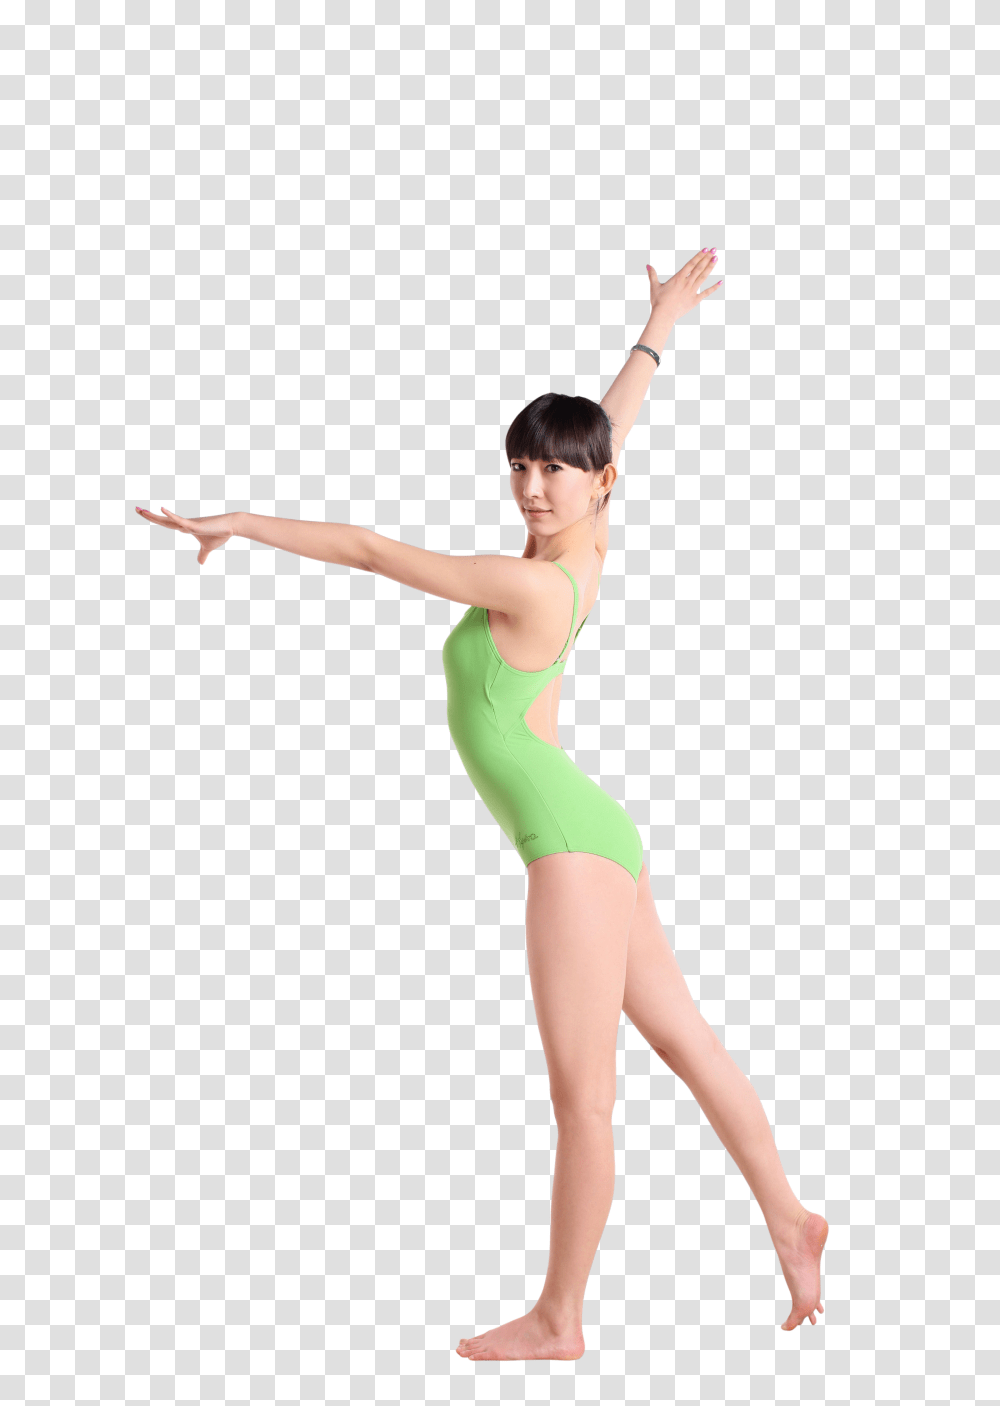 Dance, Dancing, Couple, Arts, Show, People, Pngs, Person, Dance Pose, Leisure Activities, Female Transparent Png